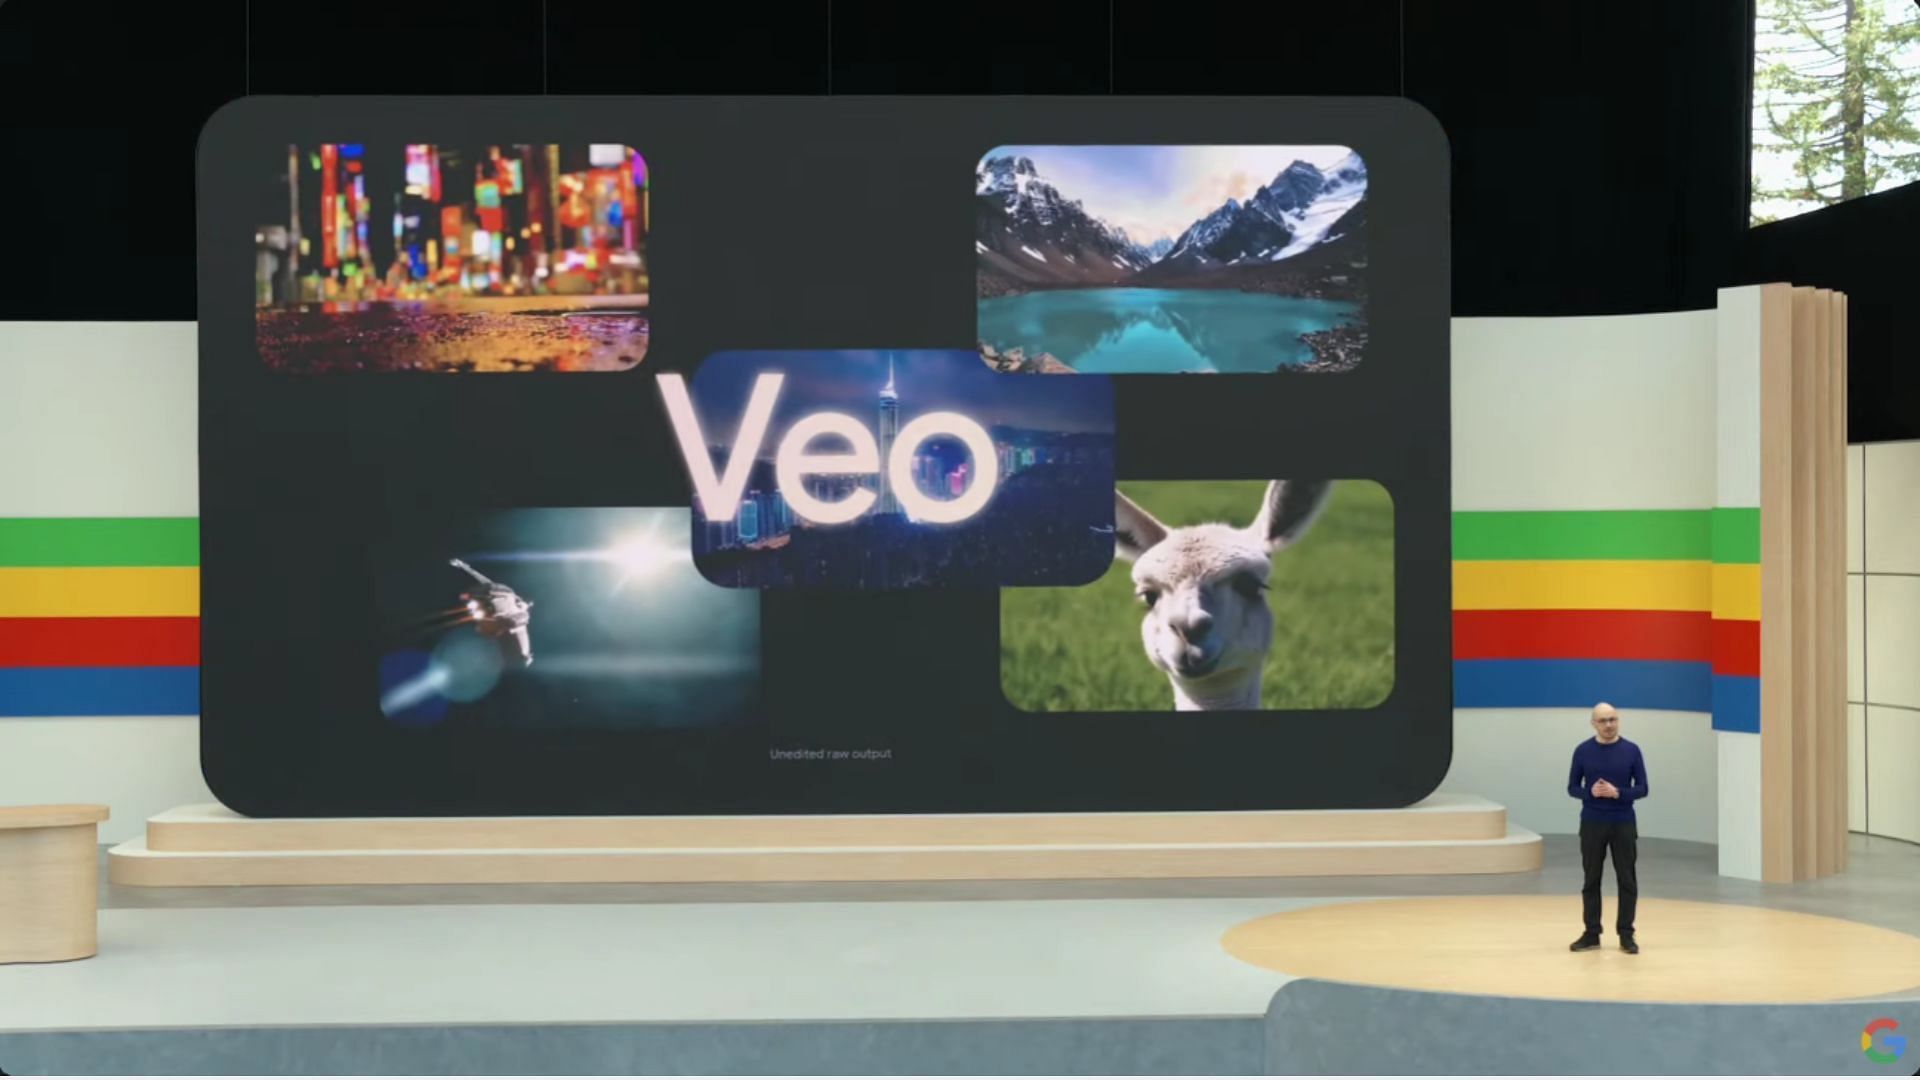 Google has introduced Veo at its new event (Image via Google)